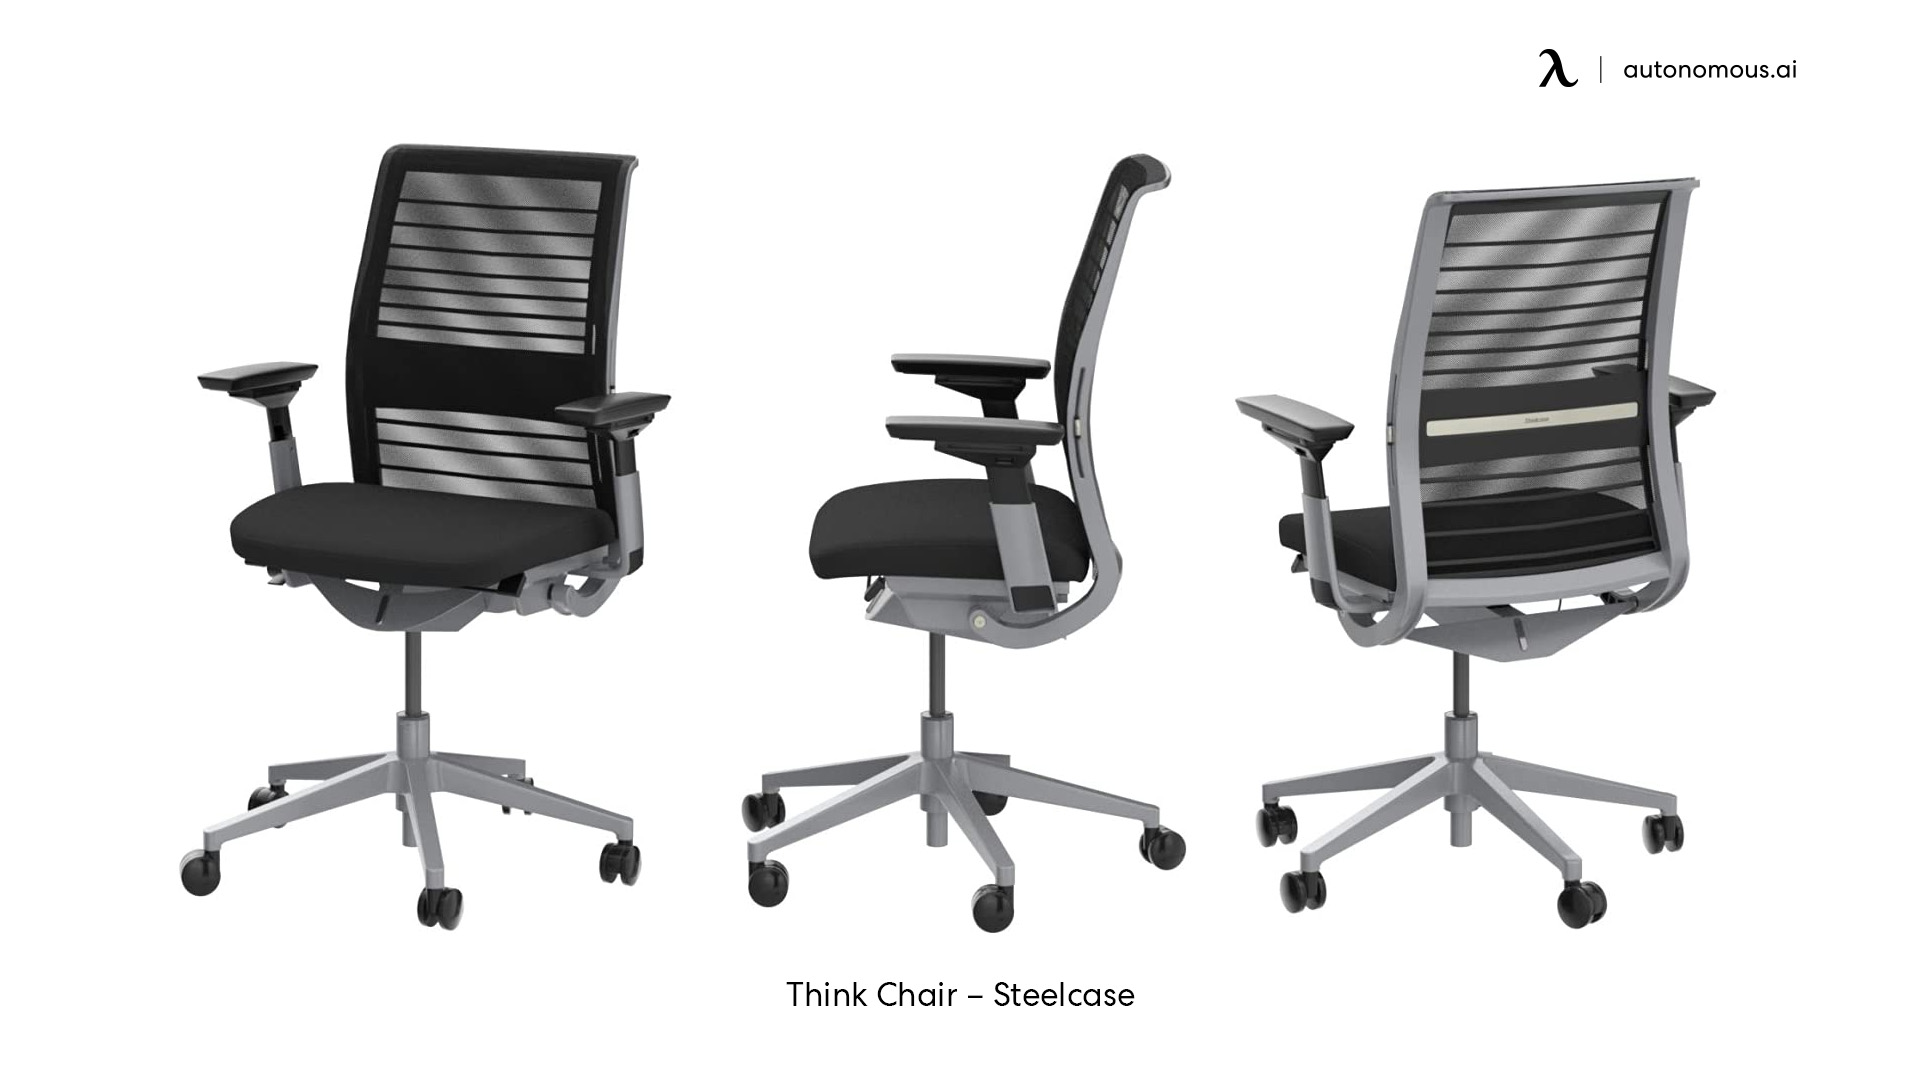 Think Chair – Steelcase